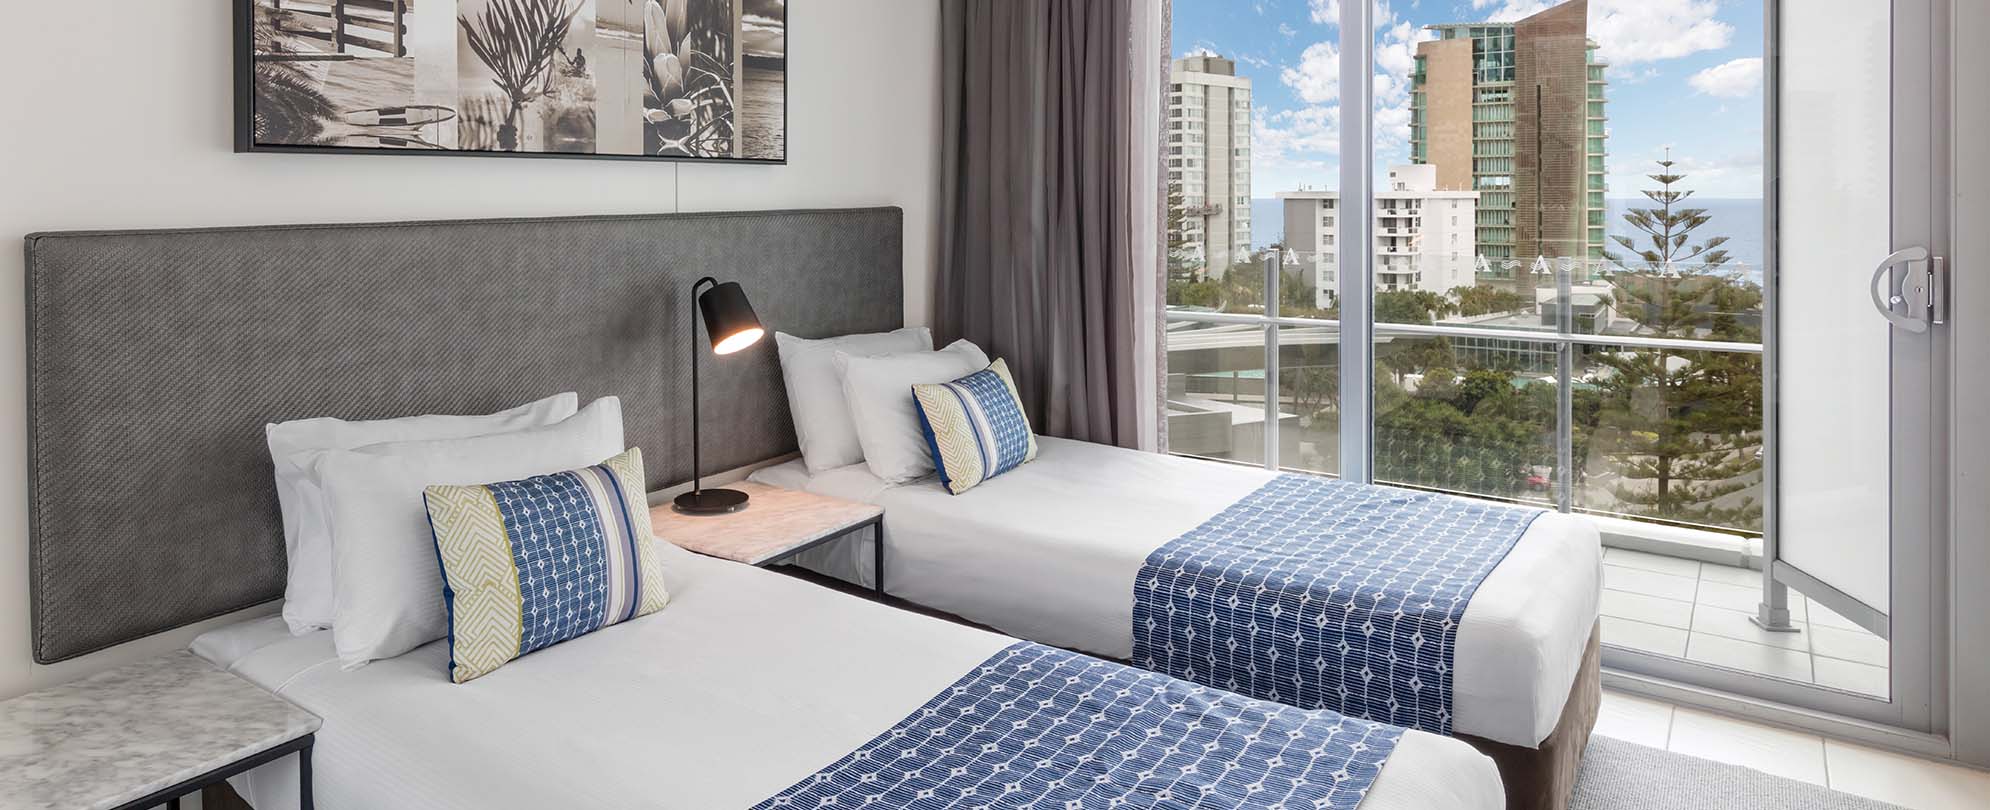 A second bedroom with two twin-sized beds in a 2-bedroom suite at Club Wyndham Surfers Paradise.